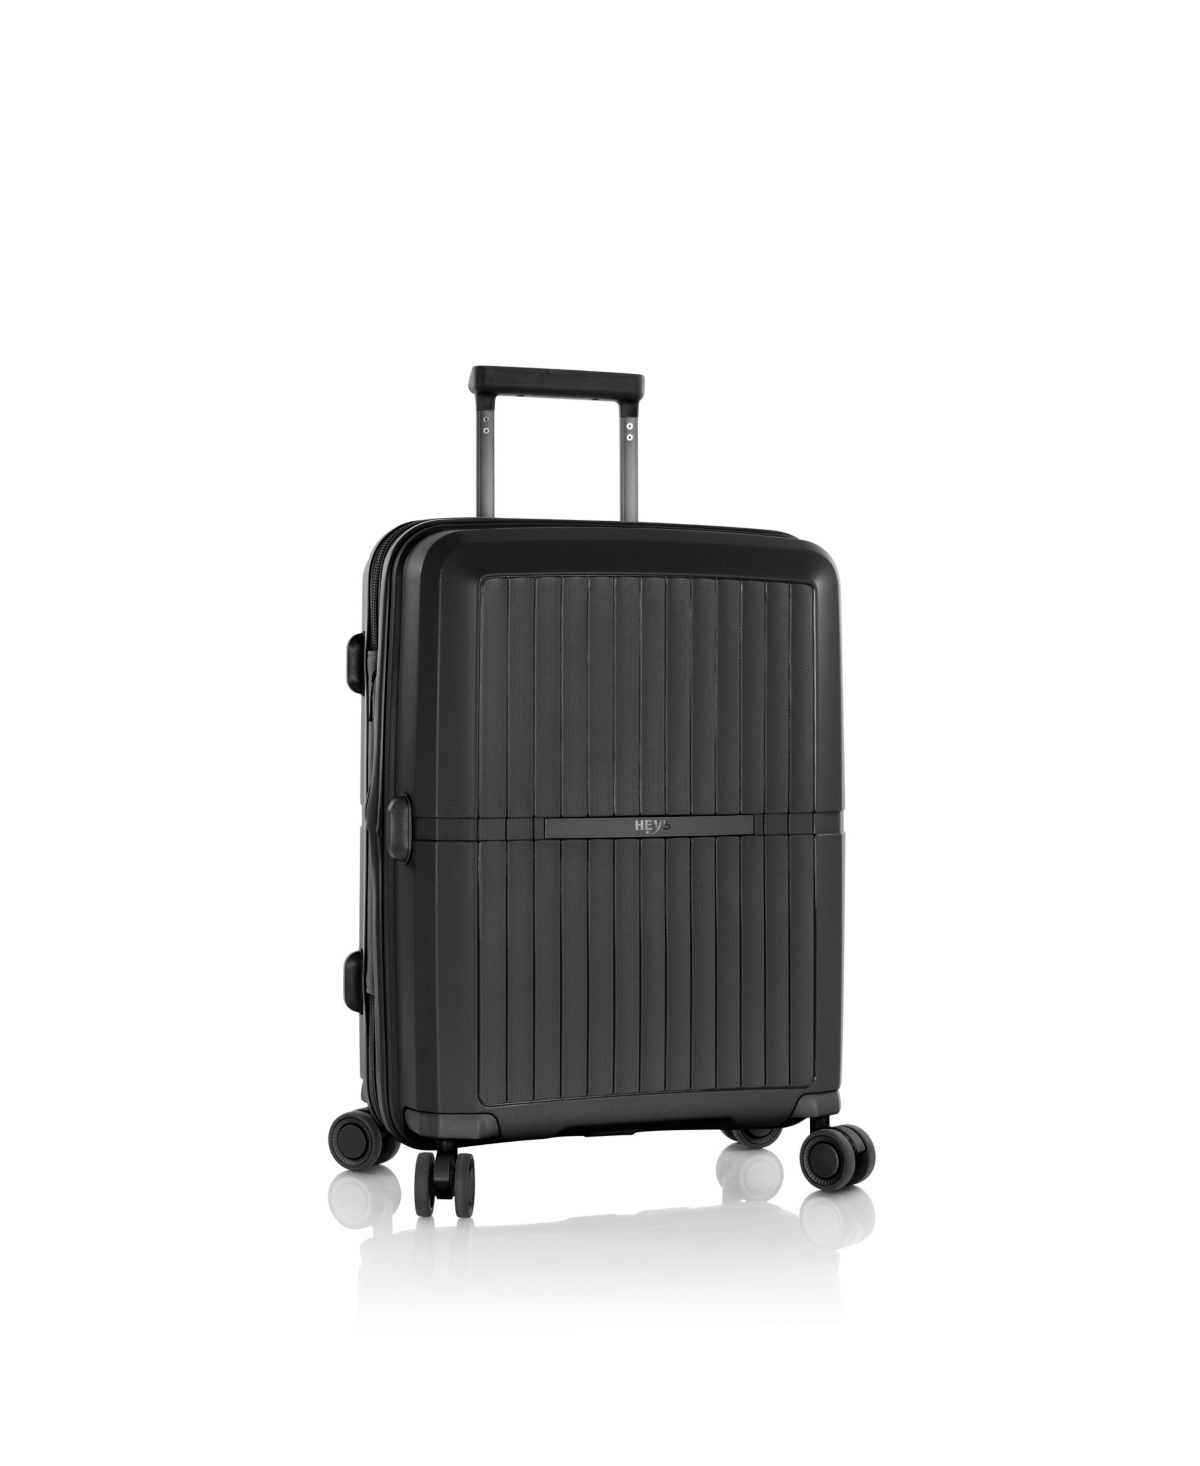 AirLite 21" Hardside Carry-On Spinner Luggage - Nude